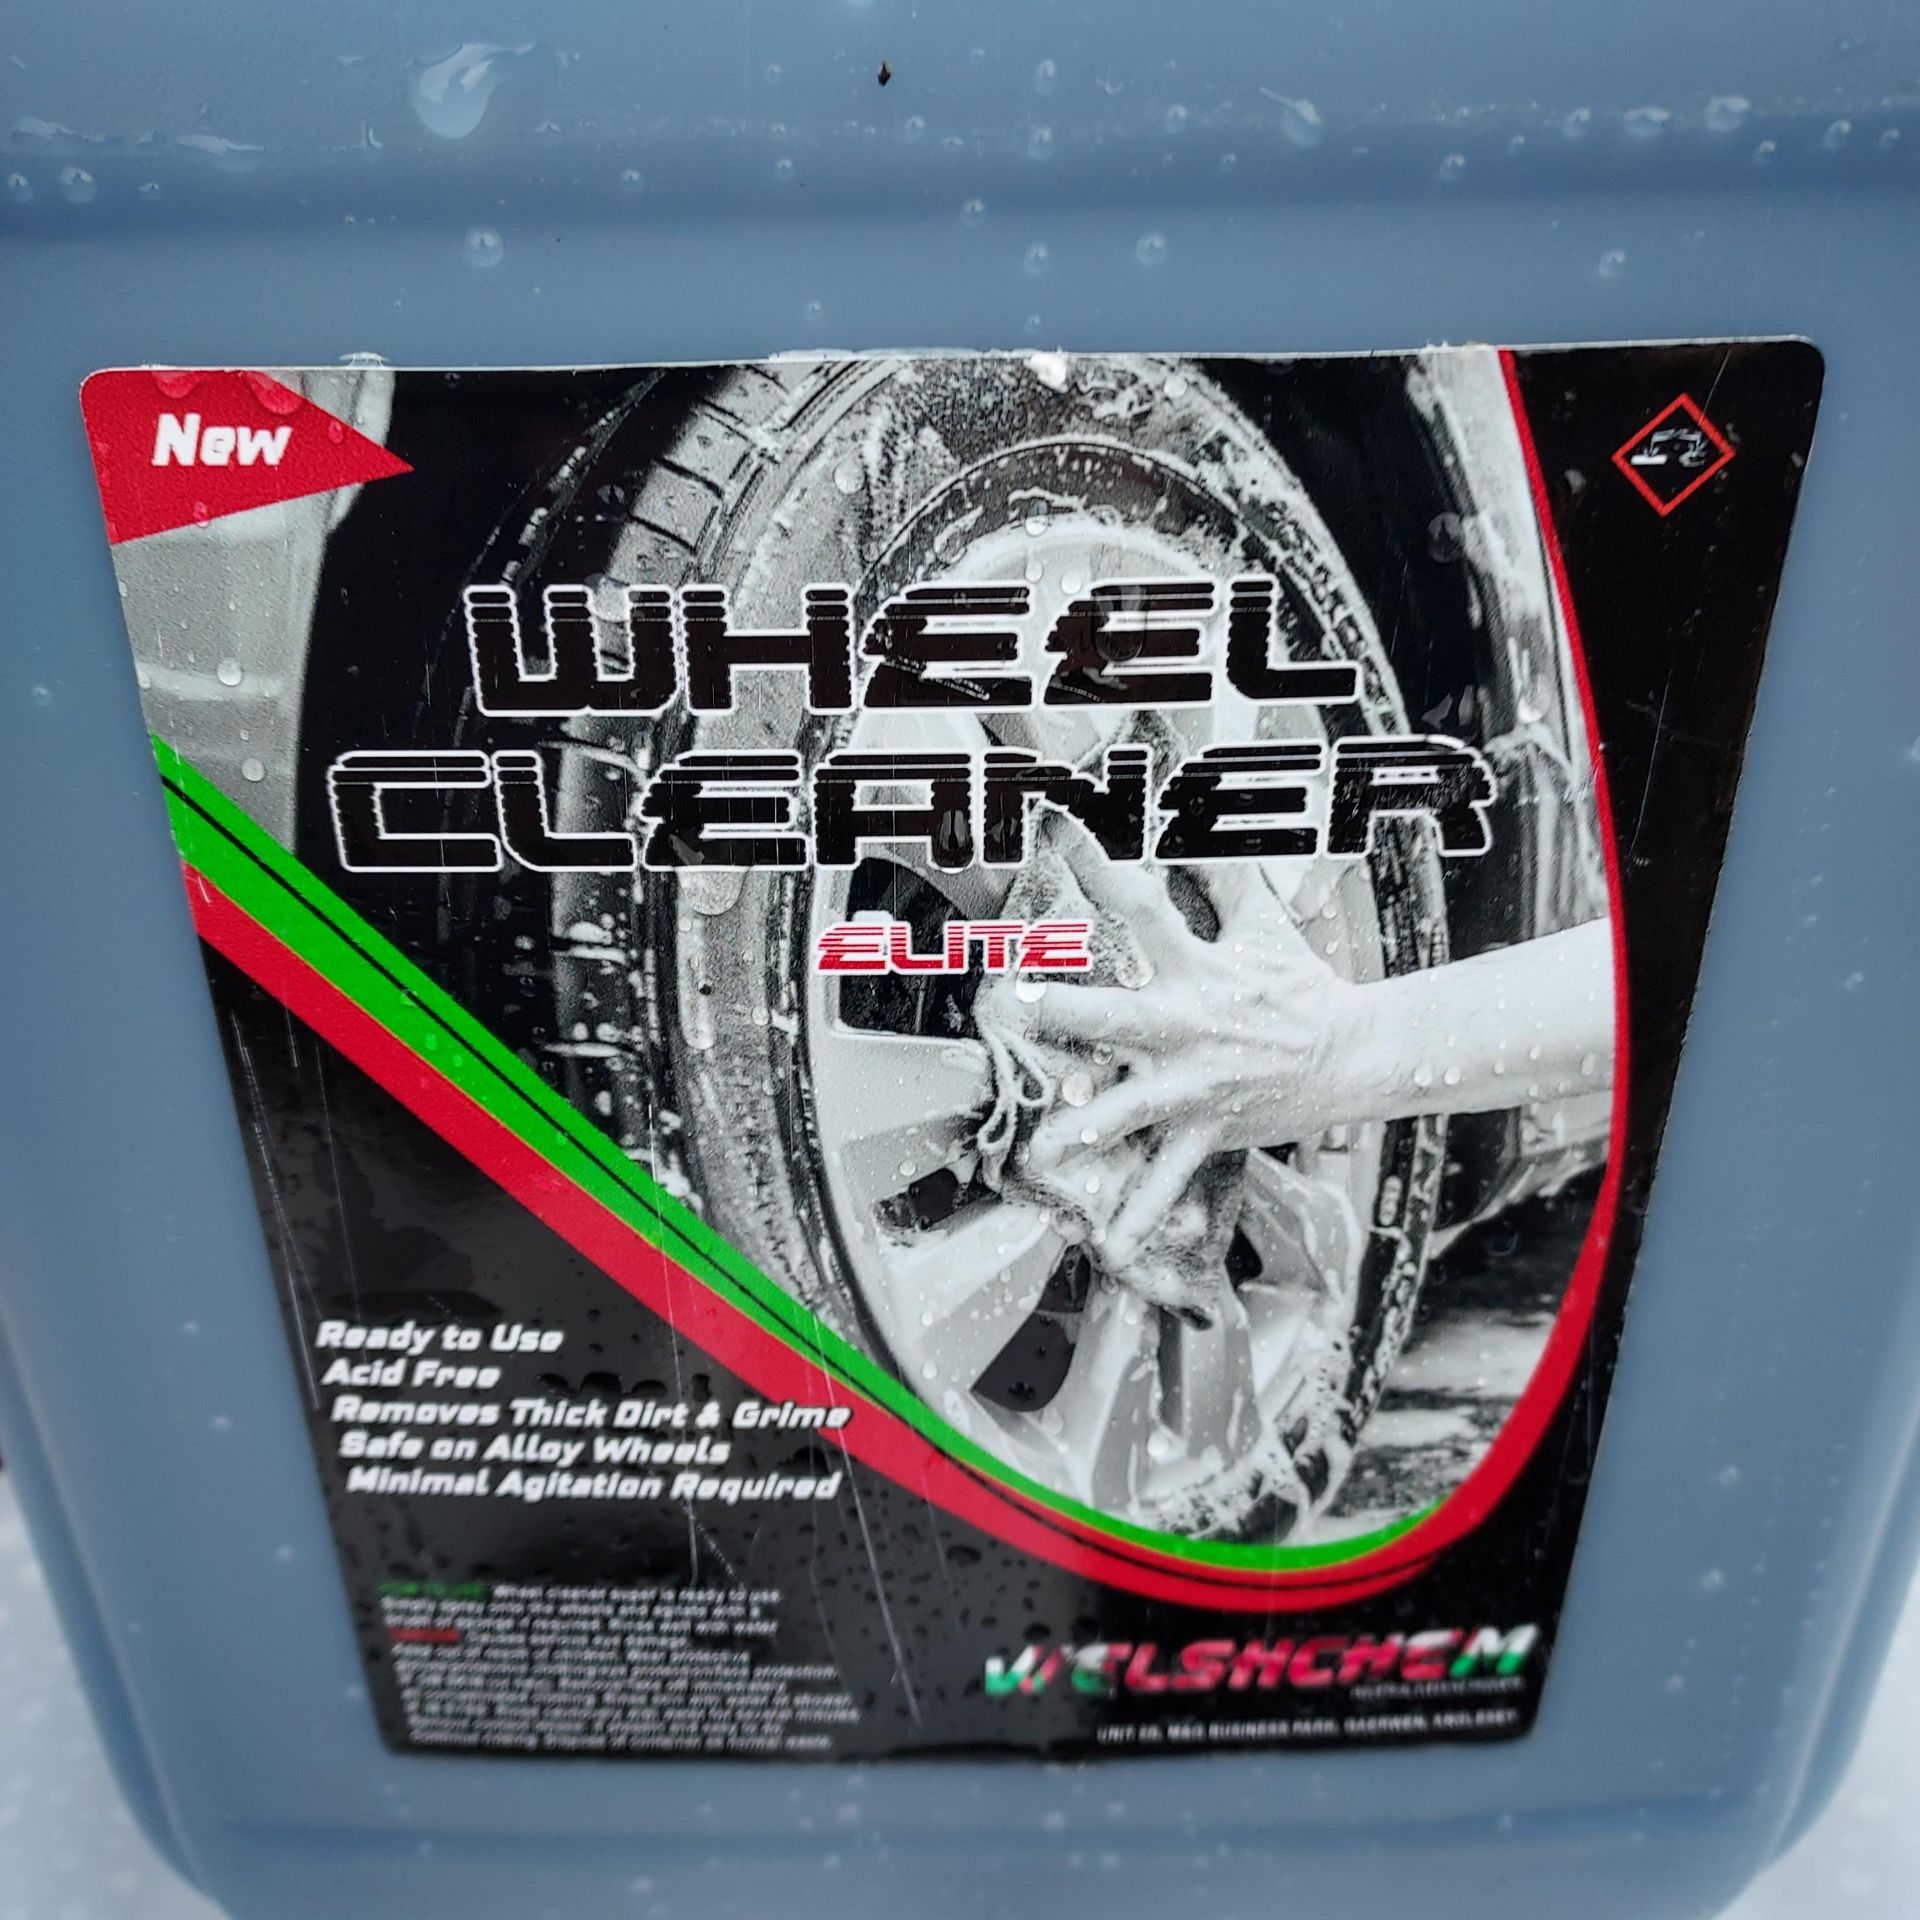 5 X BRAND NEW 10 LITRE NON ACID SUPER WHEEL CLEANER - REMOVES THICK DIRT AND GRIME - SAFE ON - Image 2 of 2